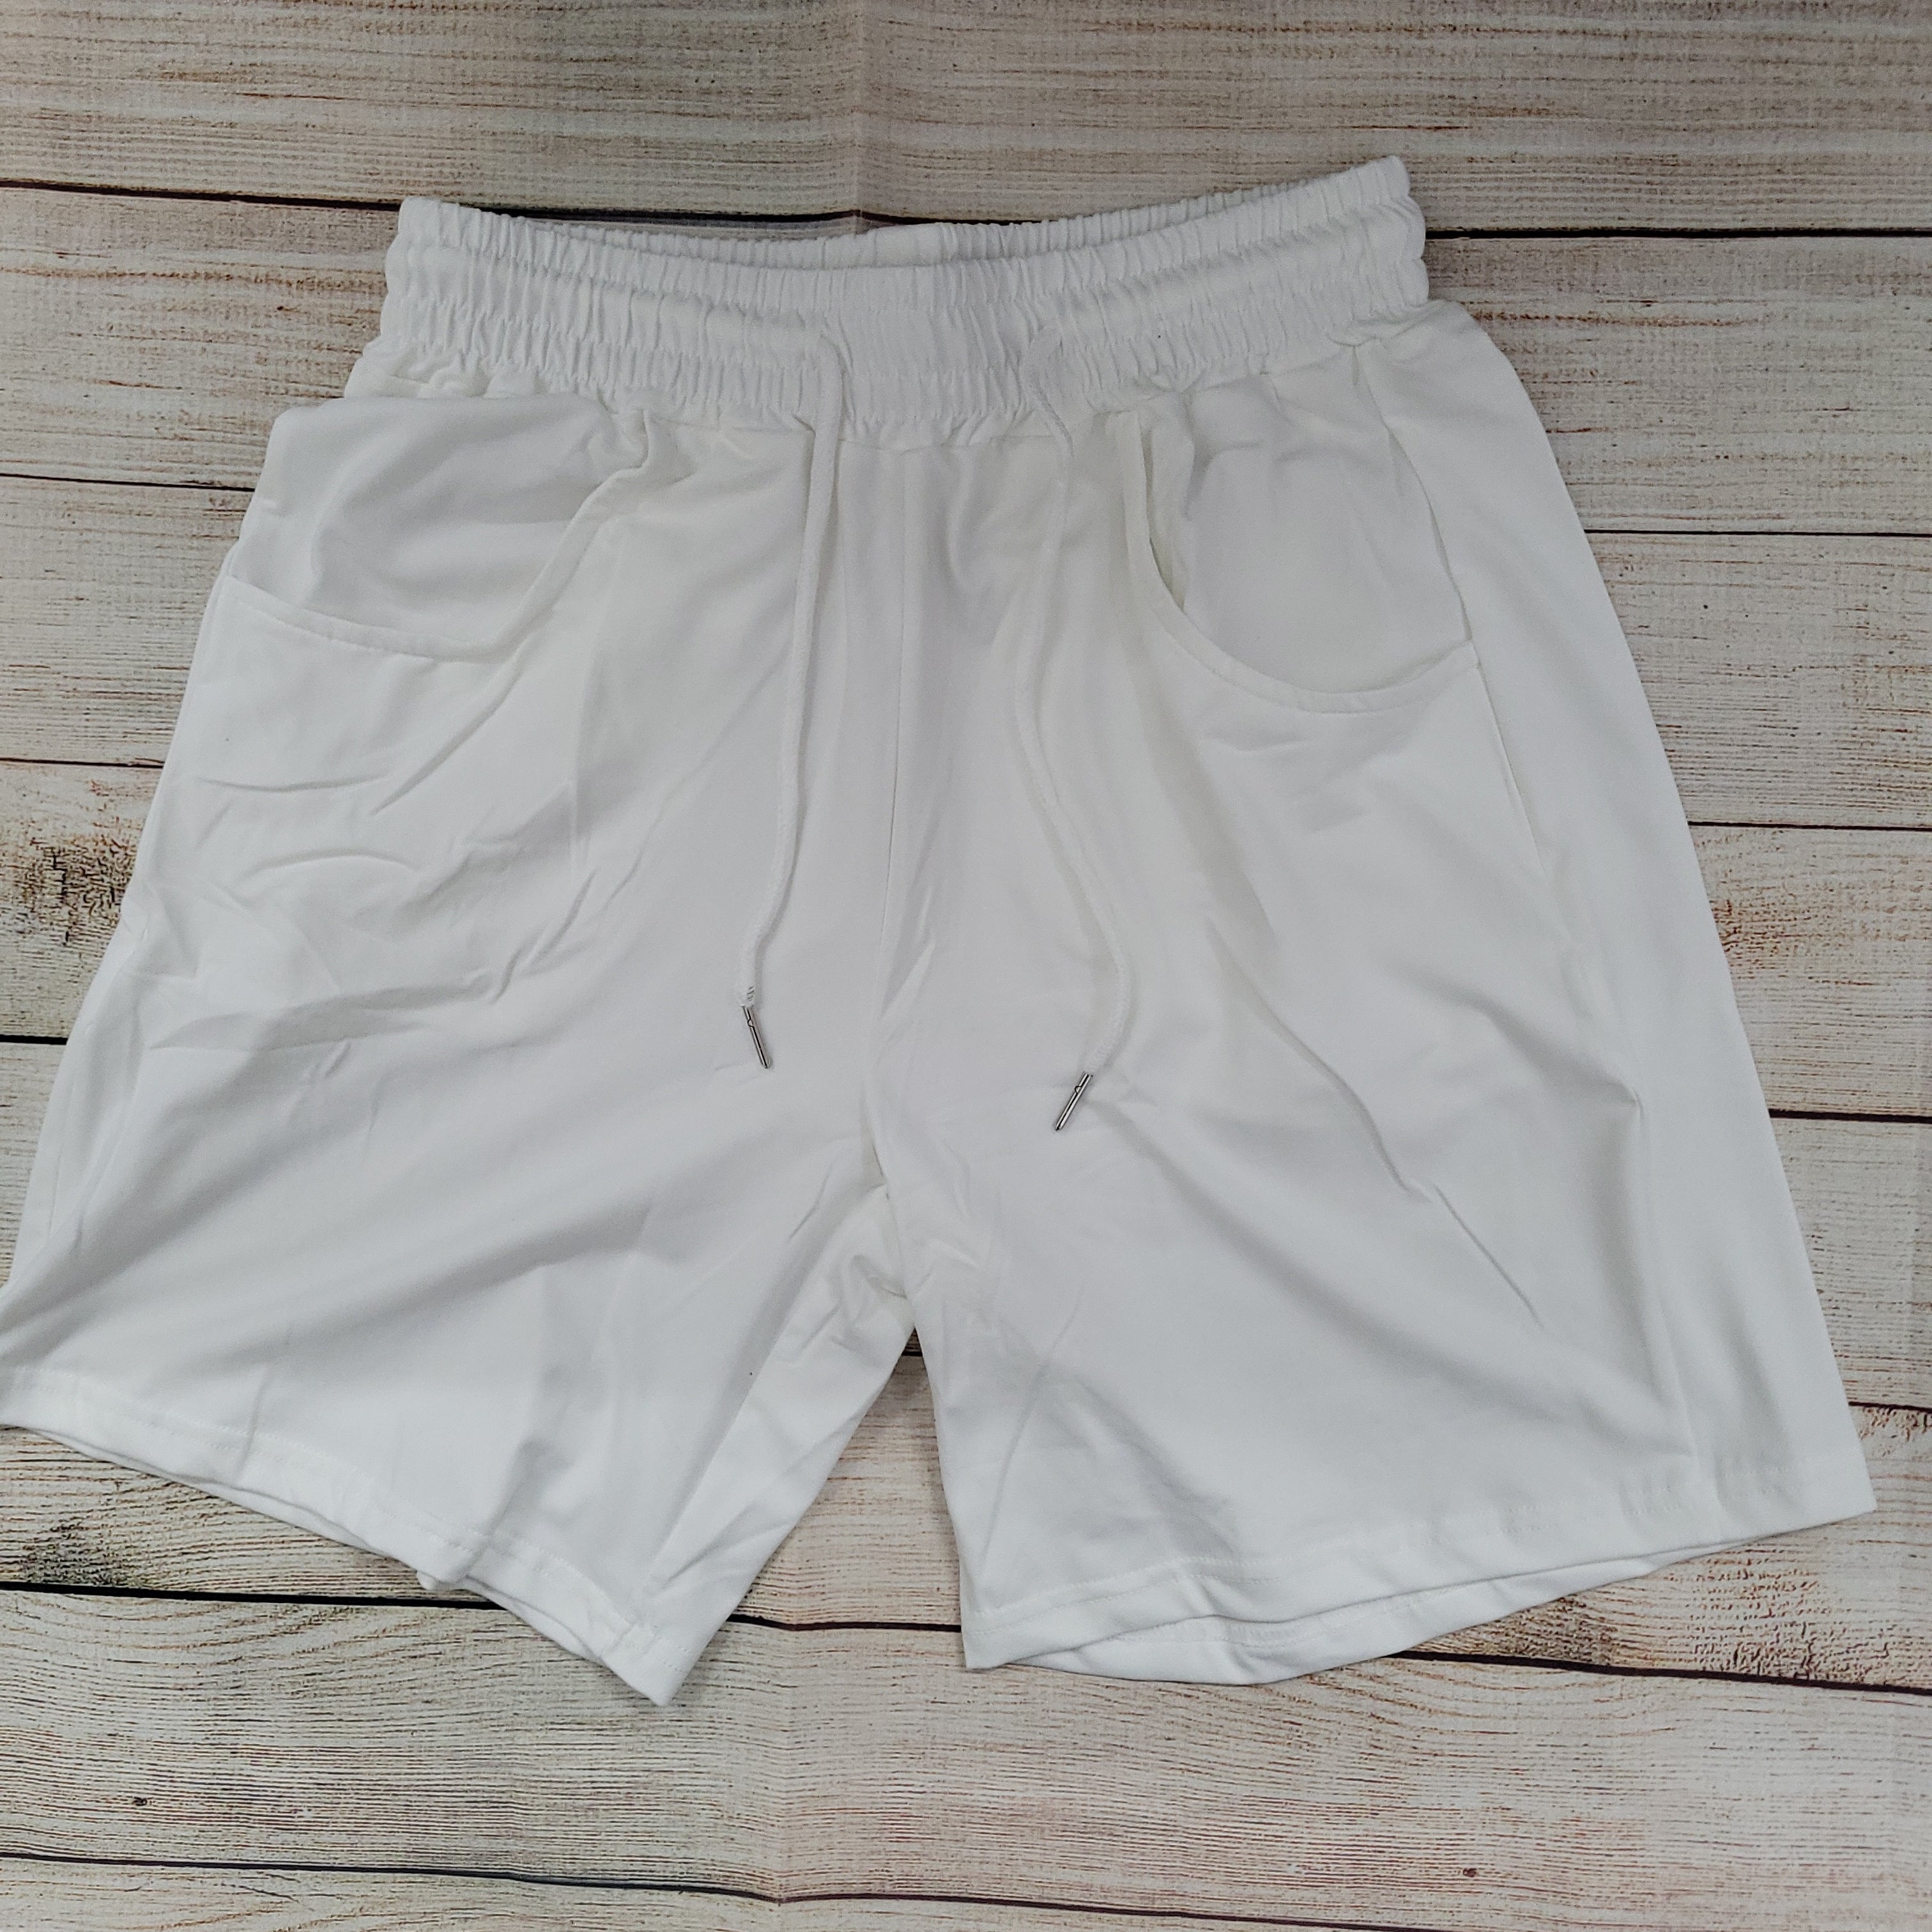 Solid White jogger Shorts with pockets 4" & 7"